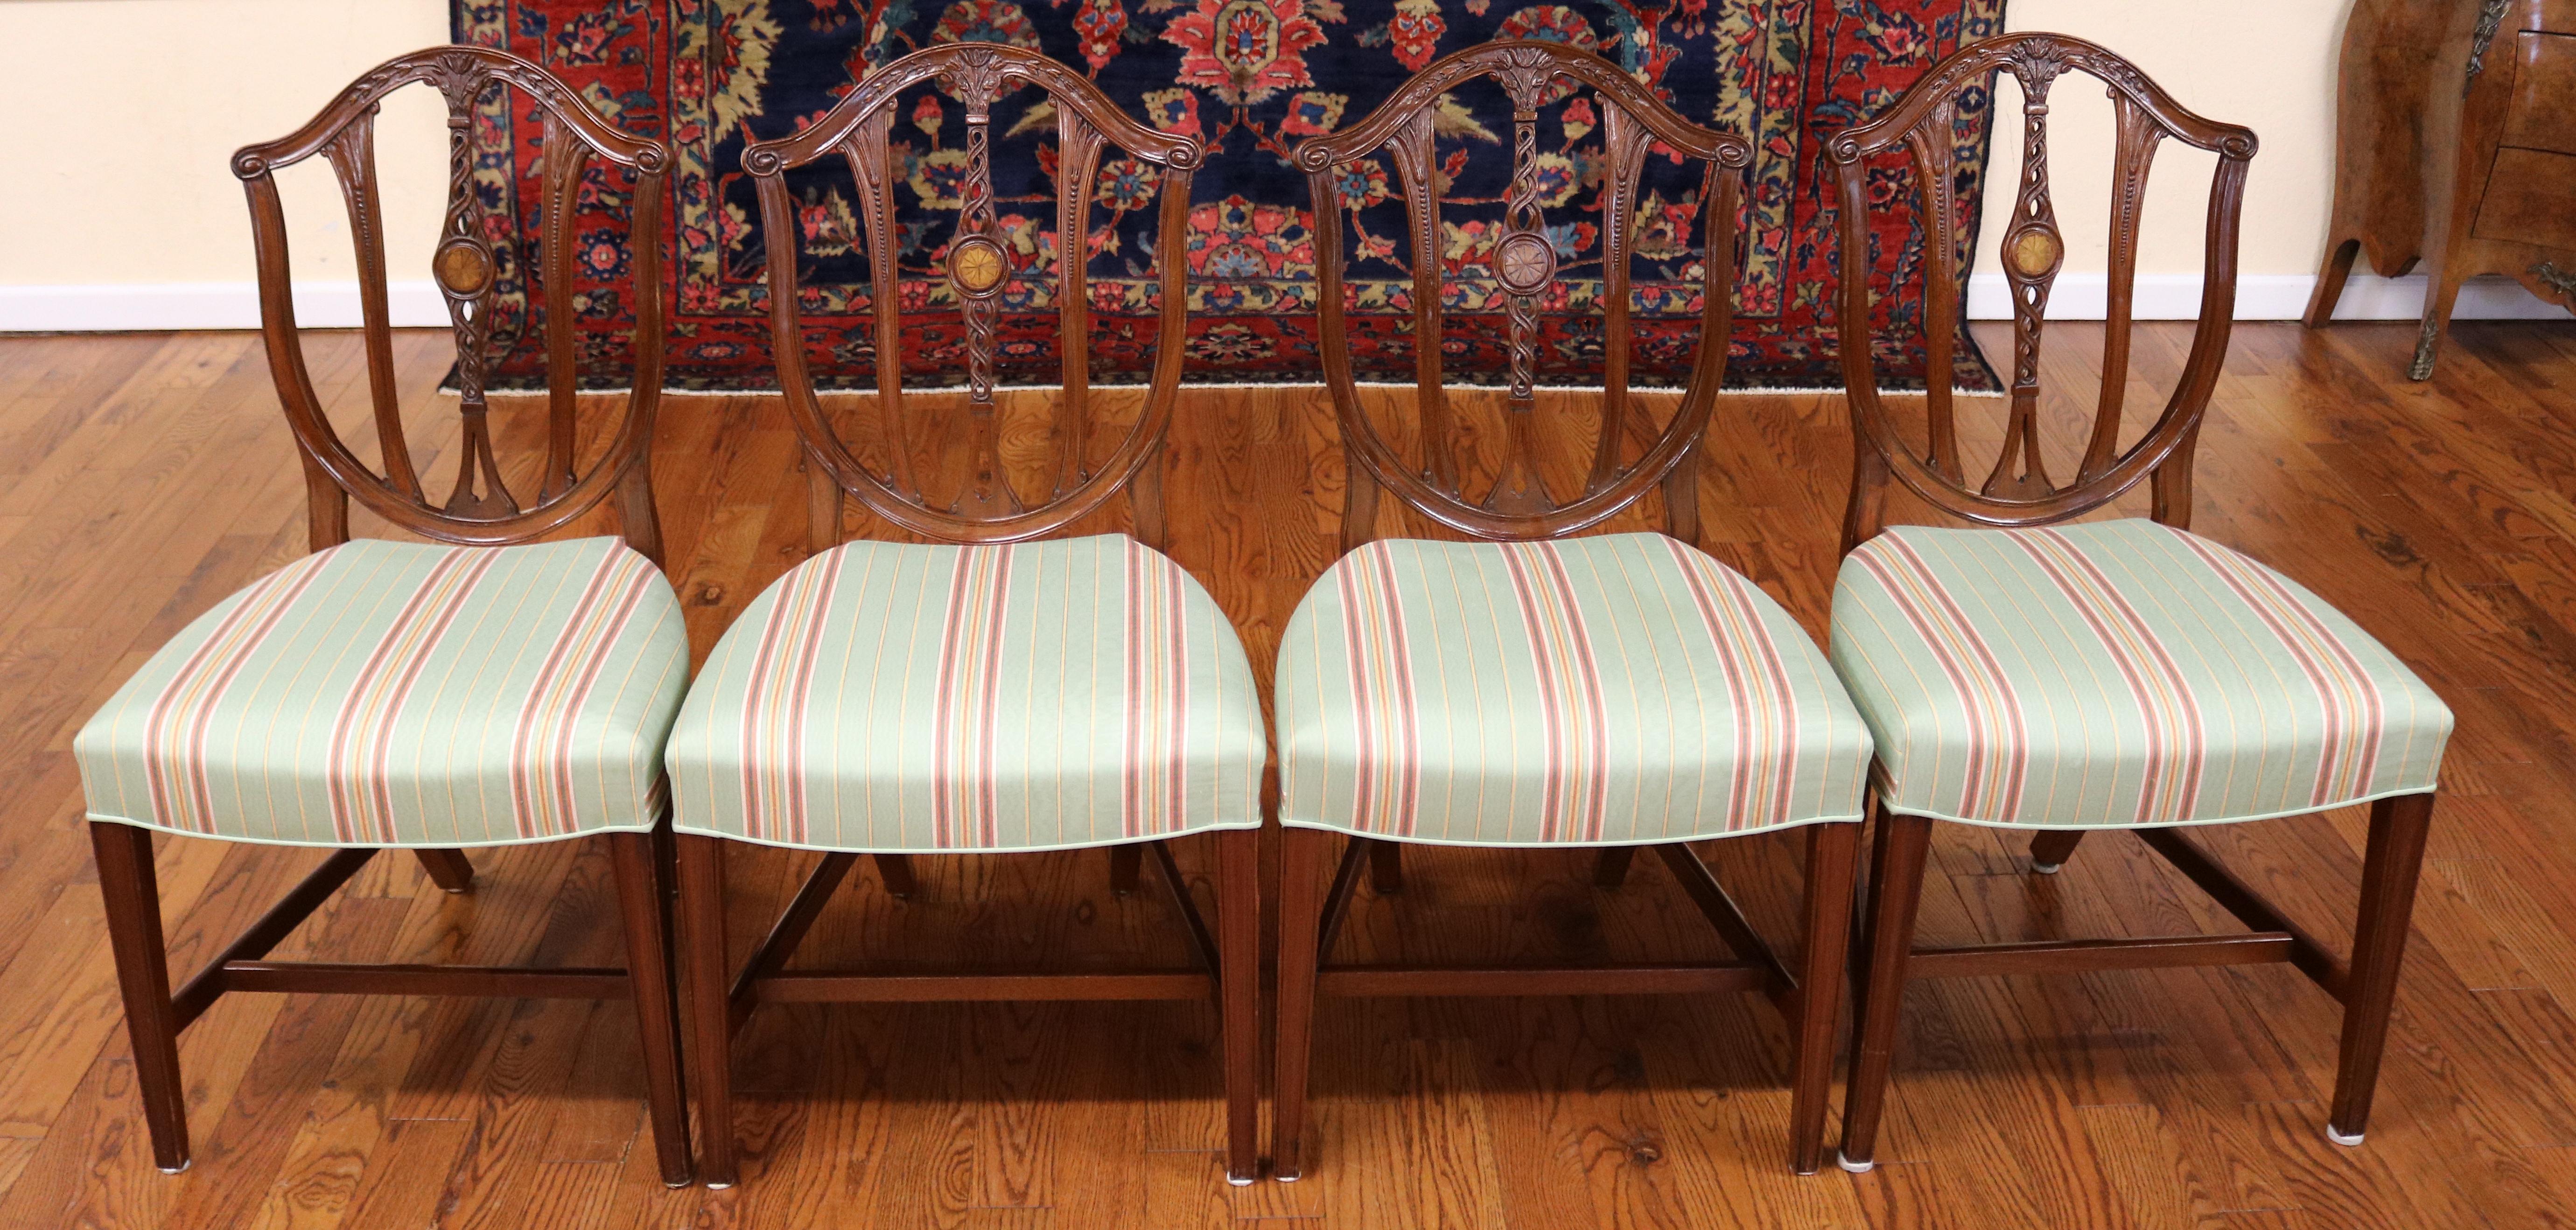 Set of 10 Early 20th Century Mahogany Baltimore Hepplewhite Dining Chairs For Sale 3